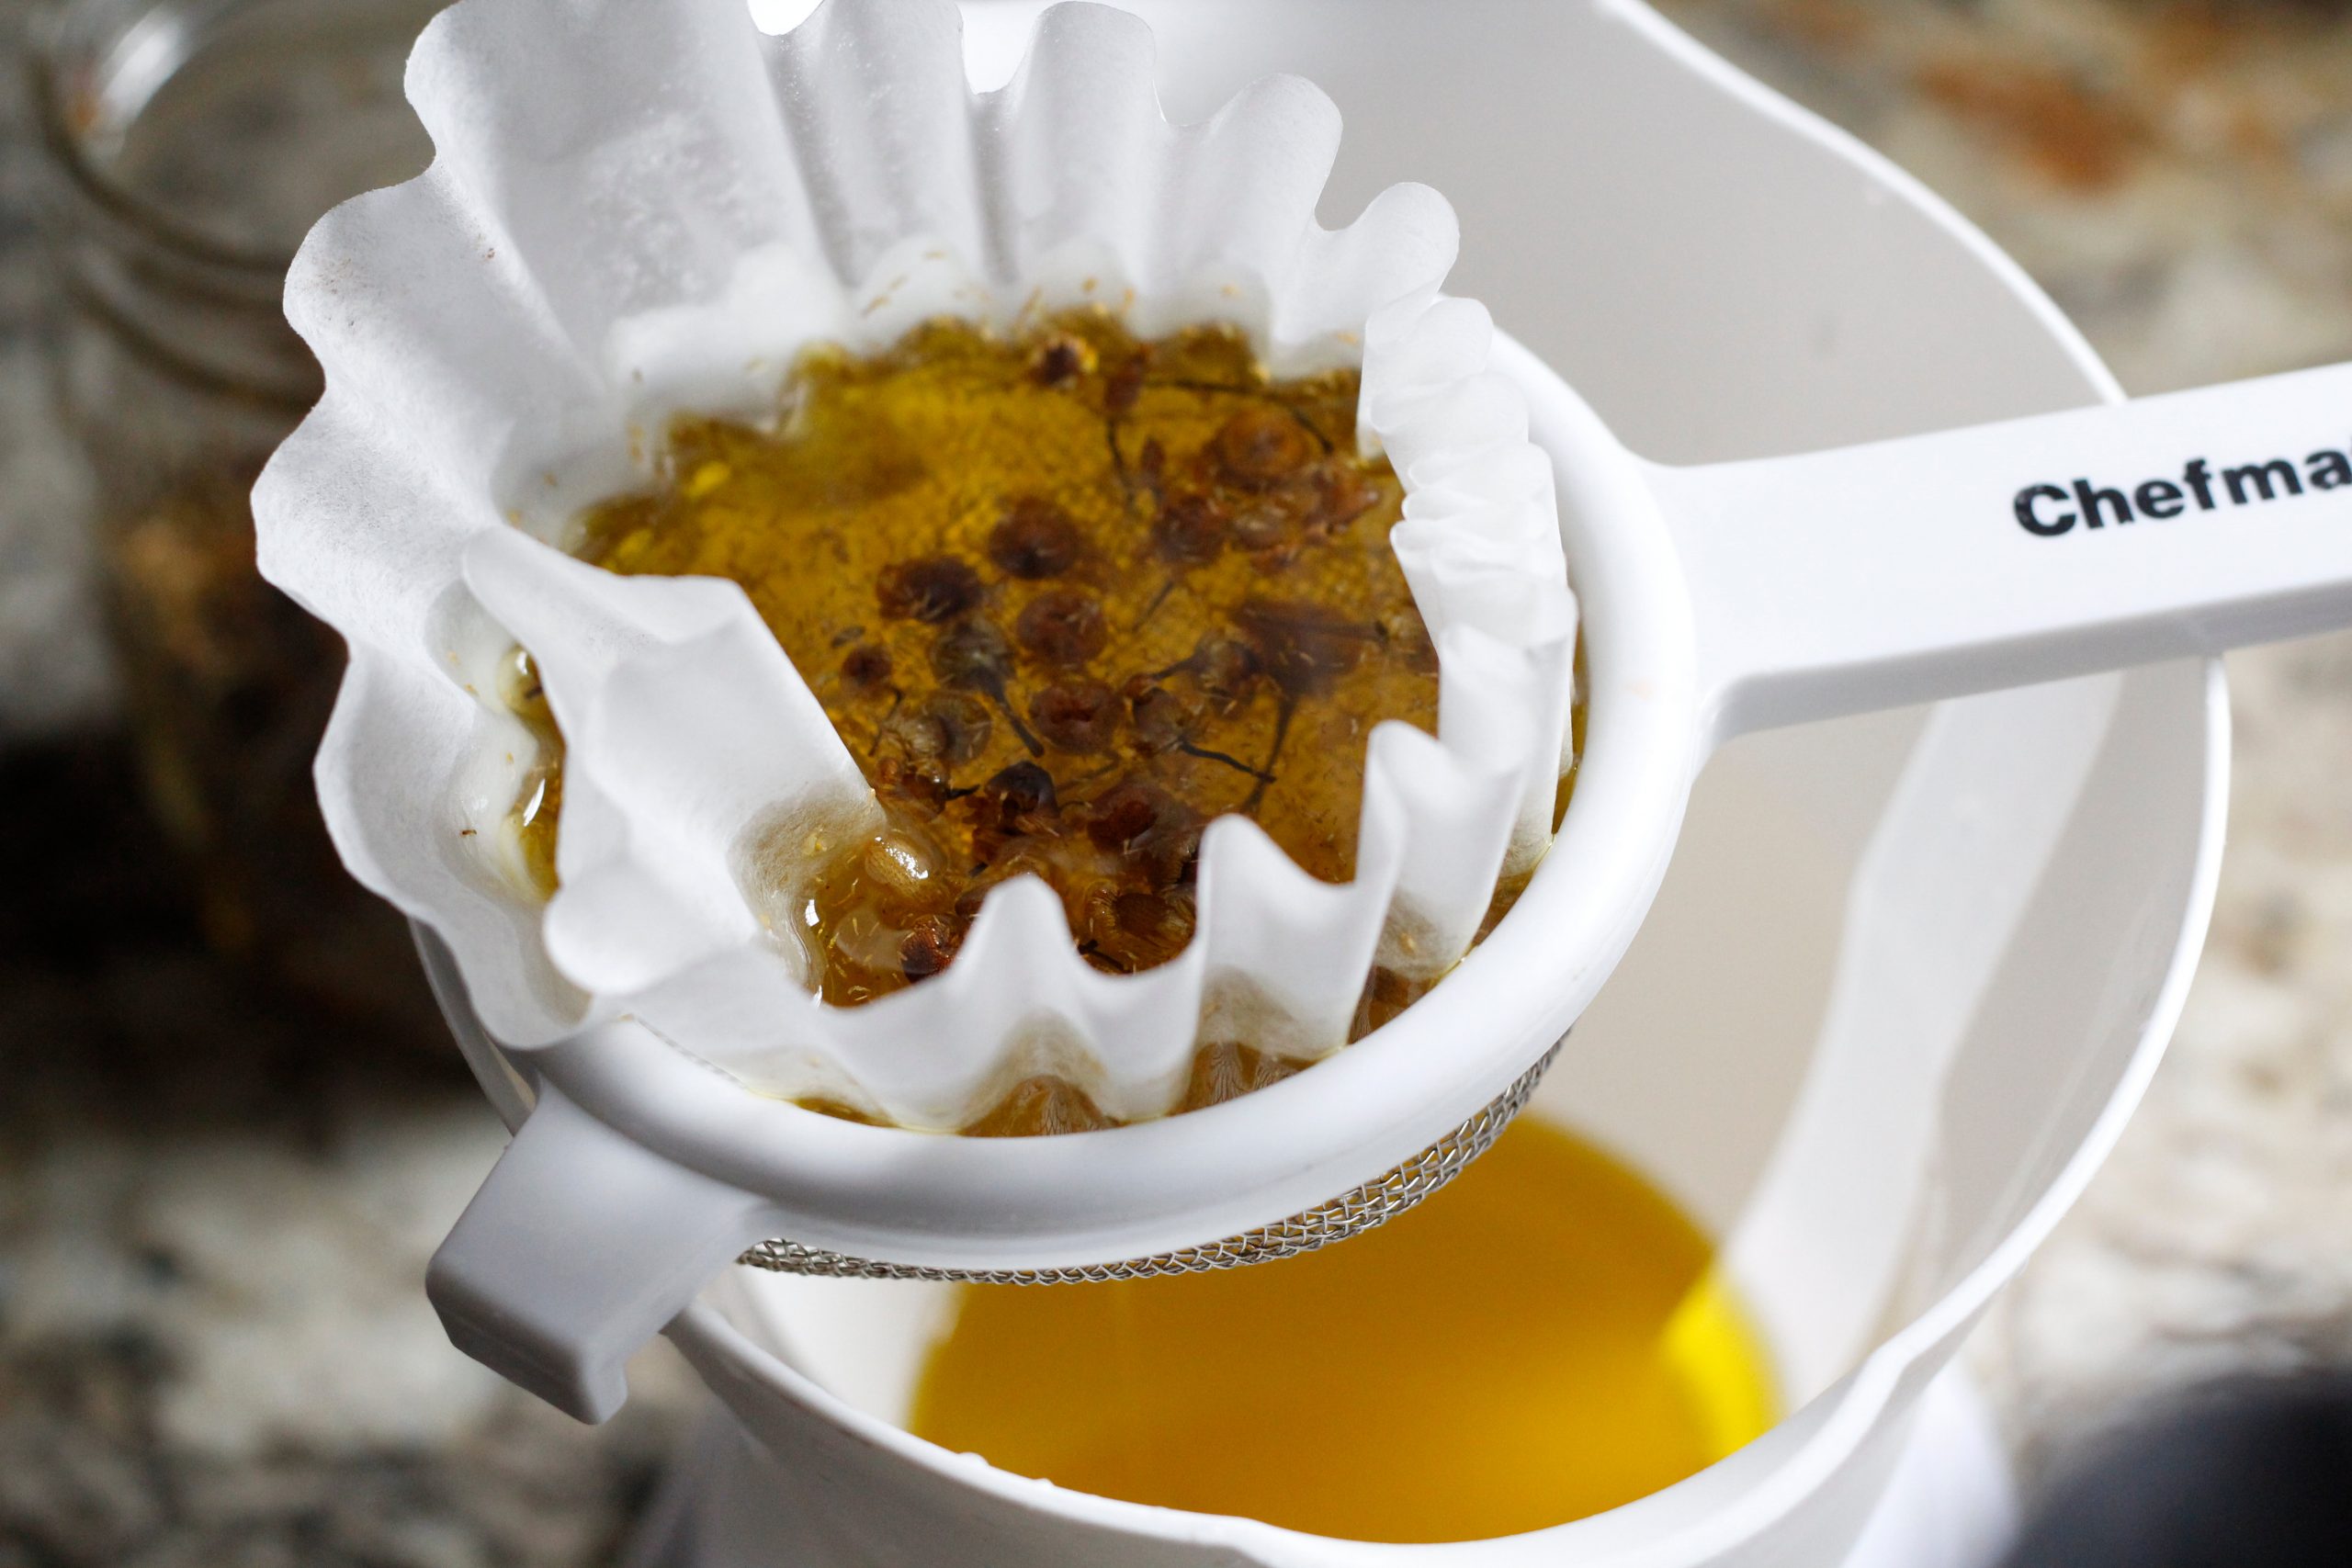 straining chamomile from olive oil